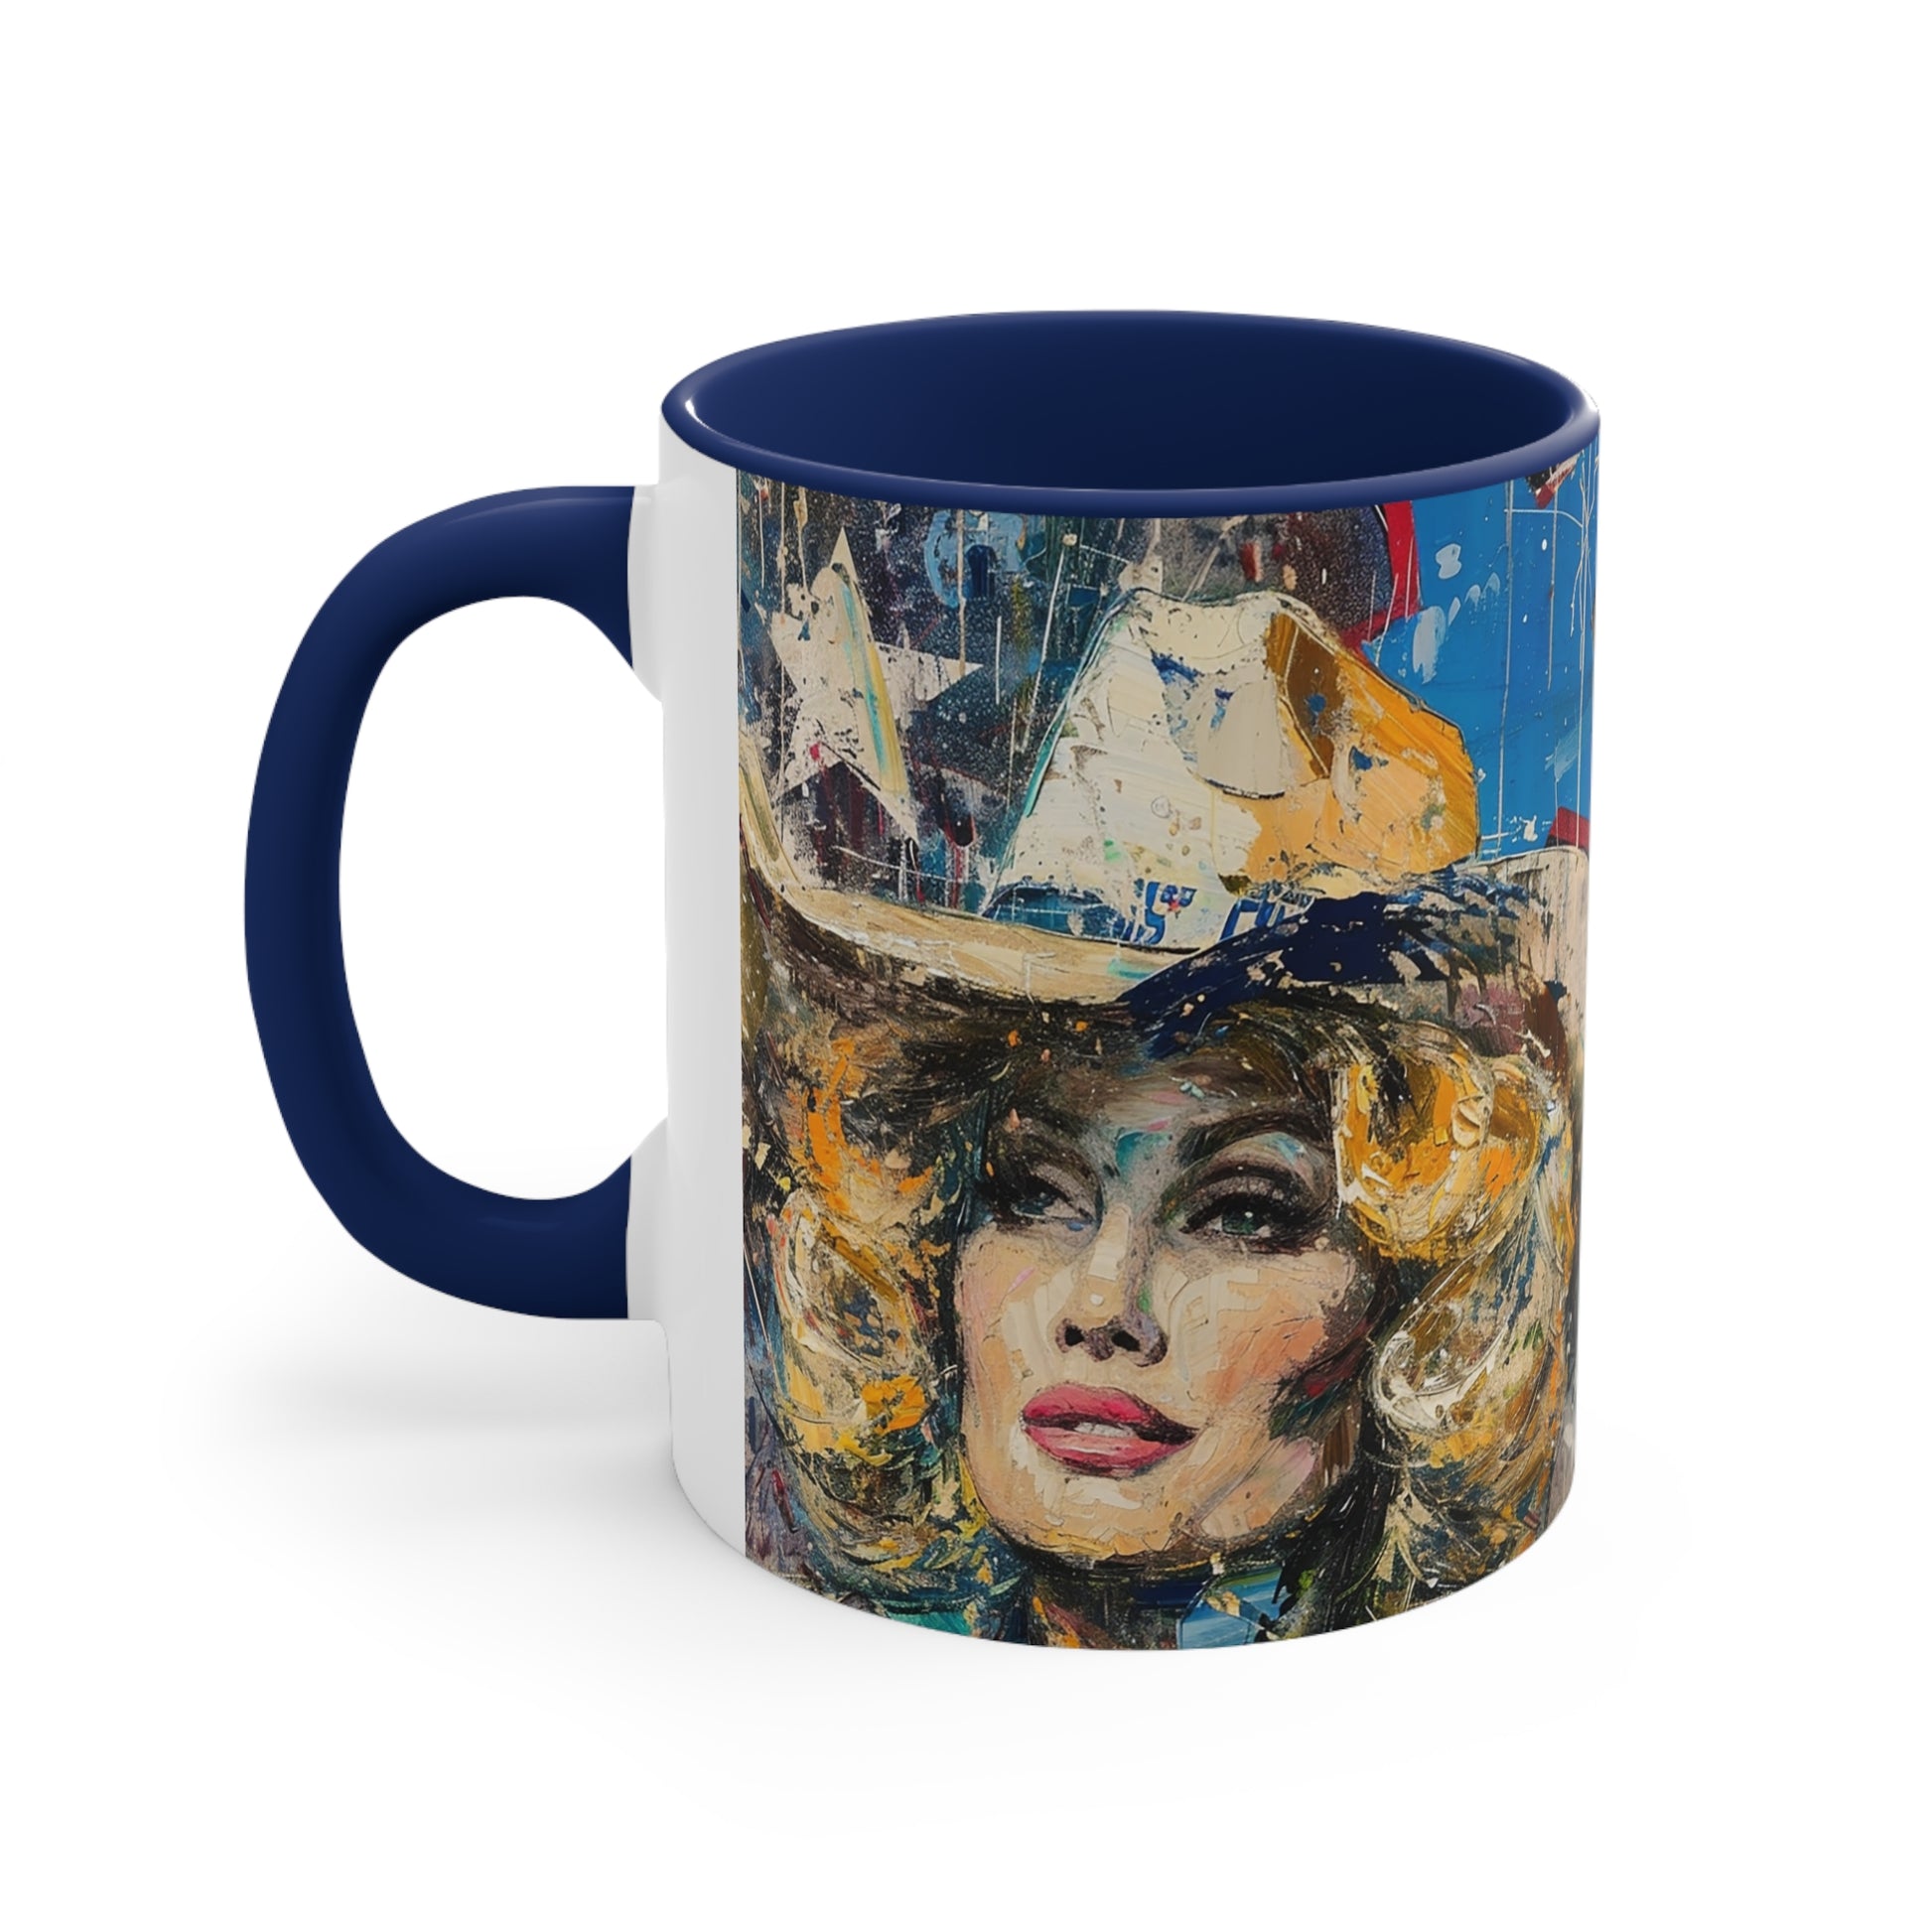 Accent Coffee Mug, 11oz - Country Queen navy side